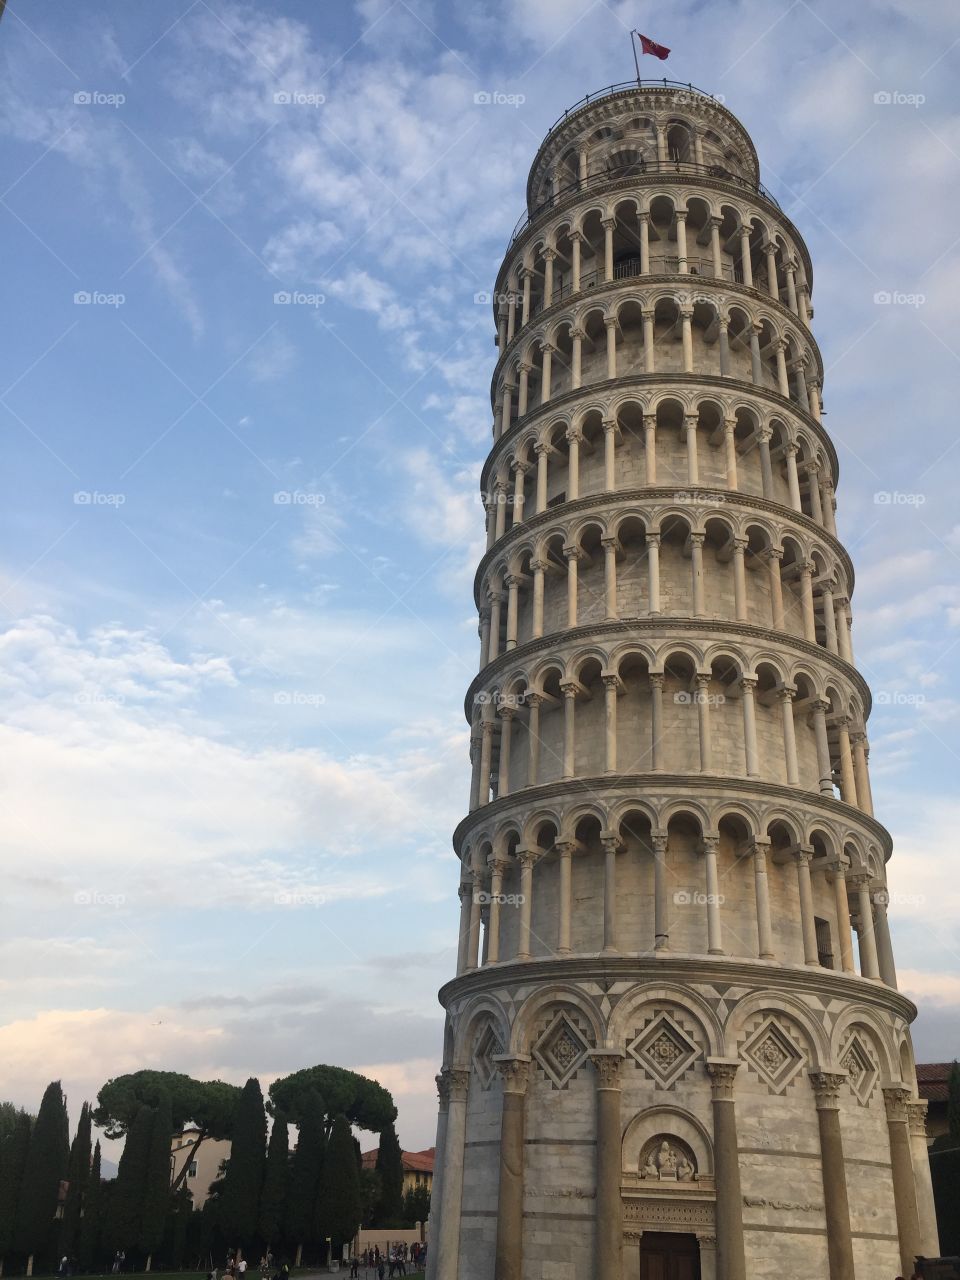 the tower of pisa 